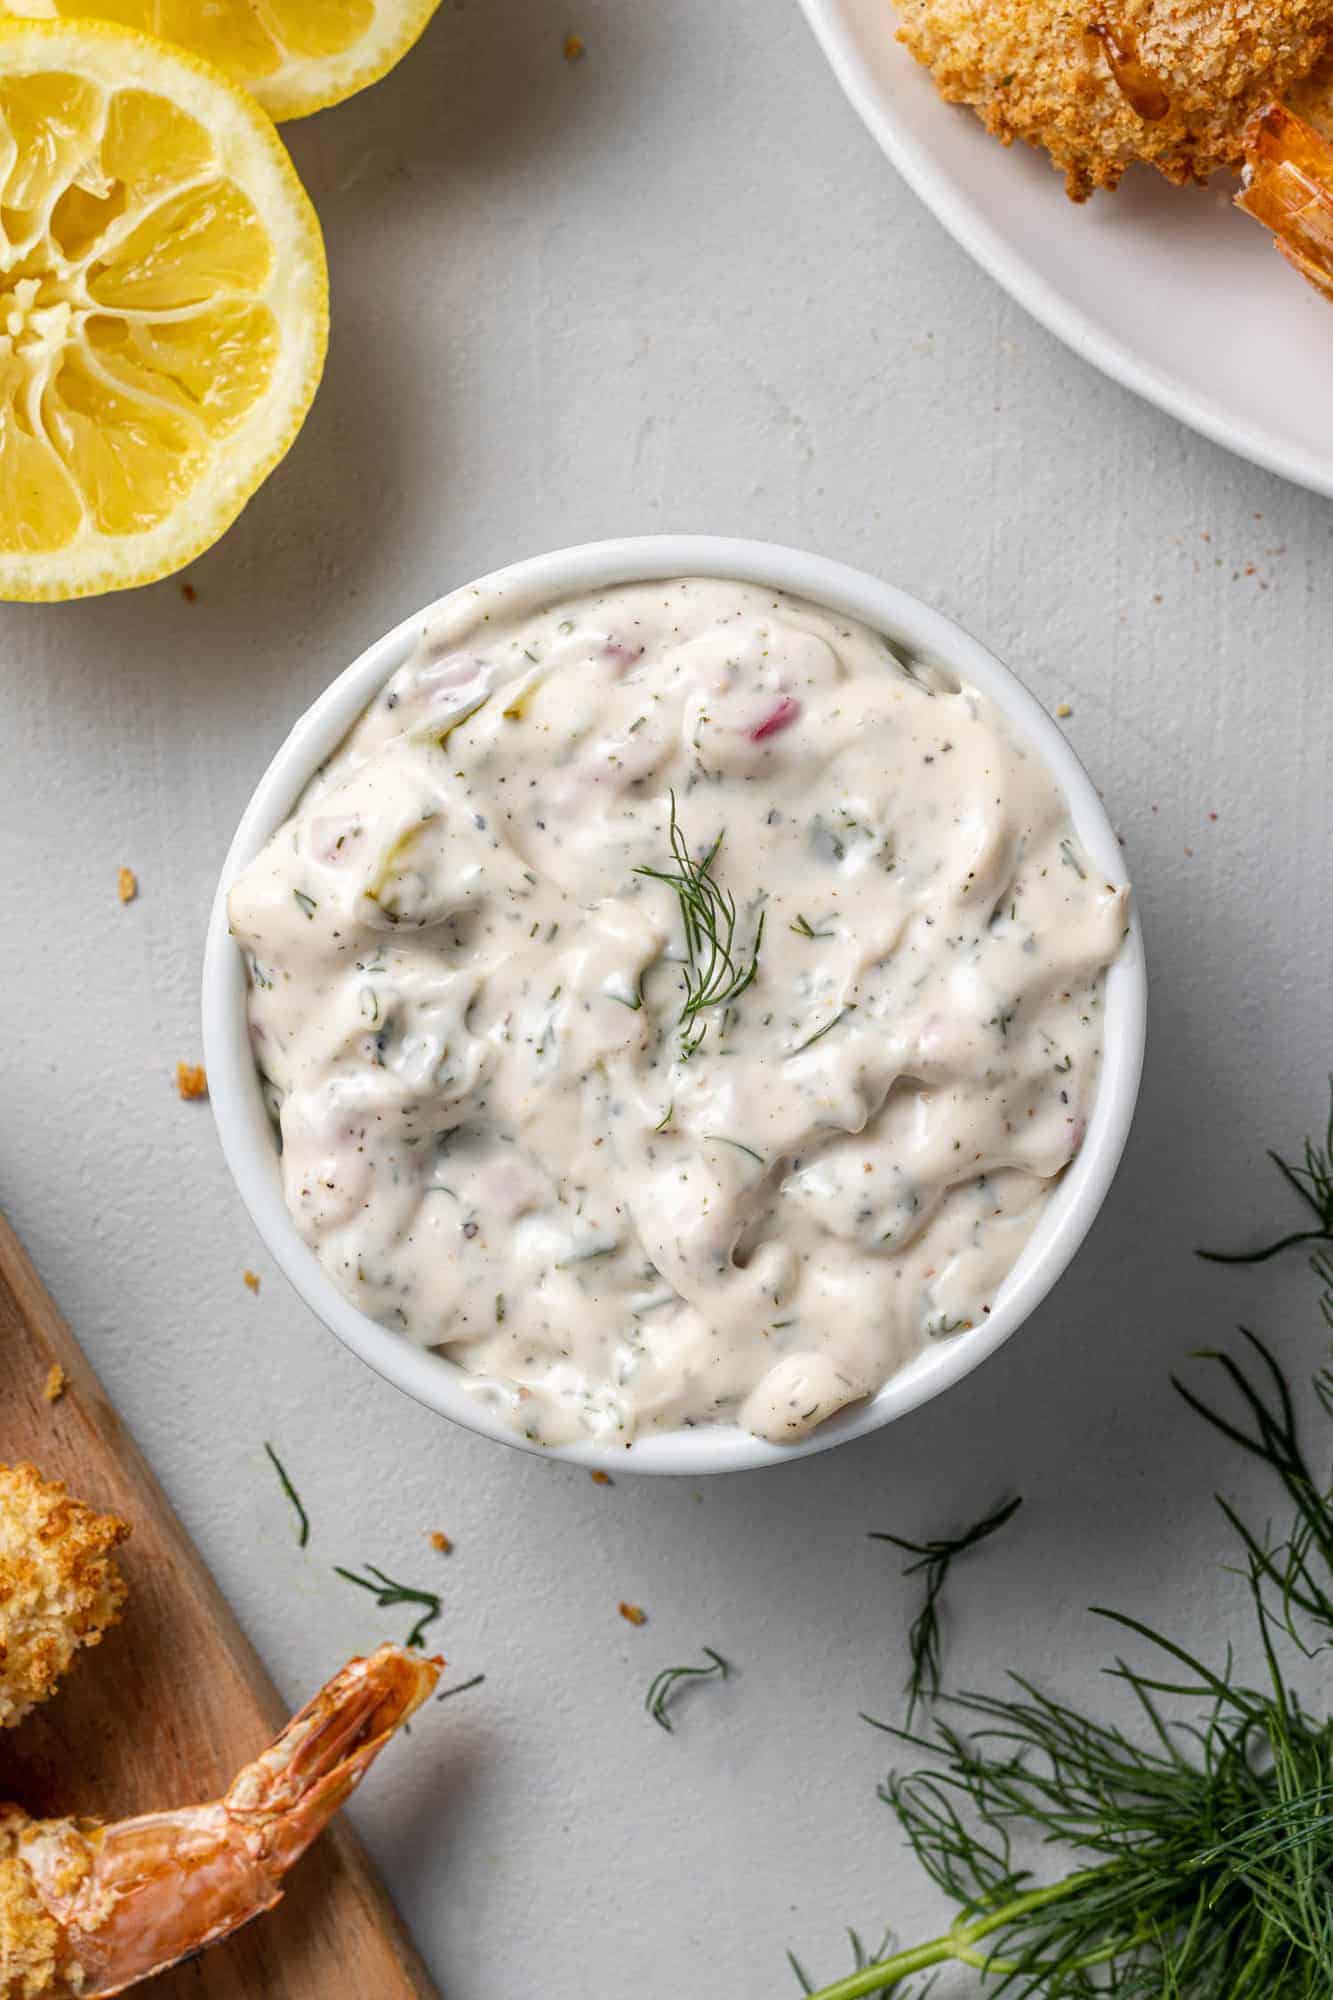 White creamy sauce surrounded by breaded shrimp, fresh dill, and lemon halves.